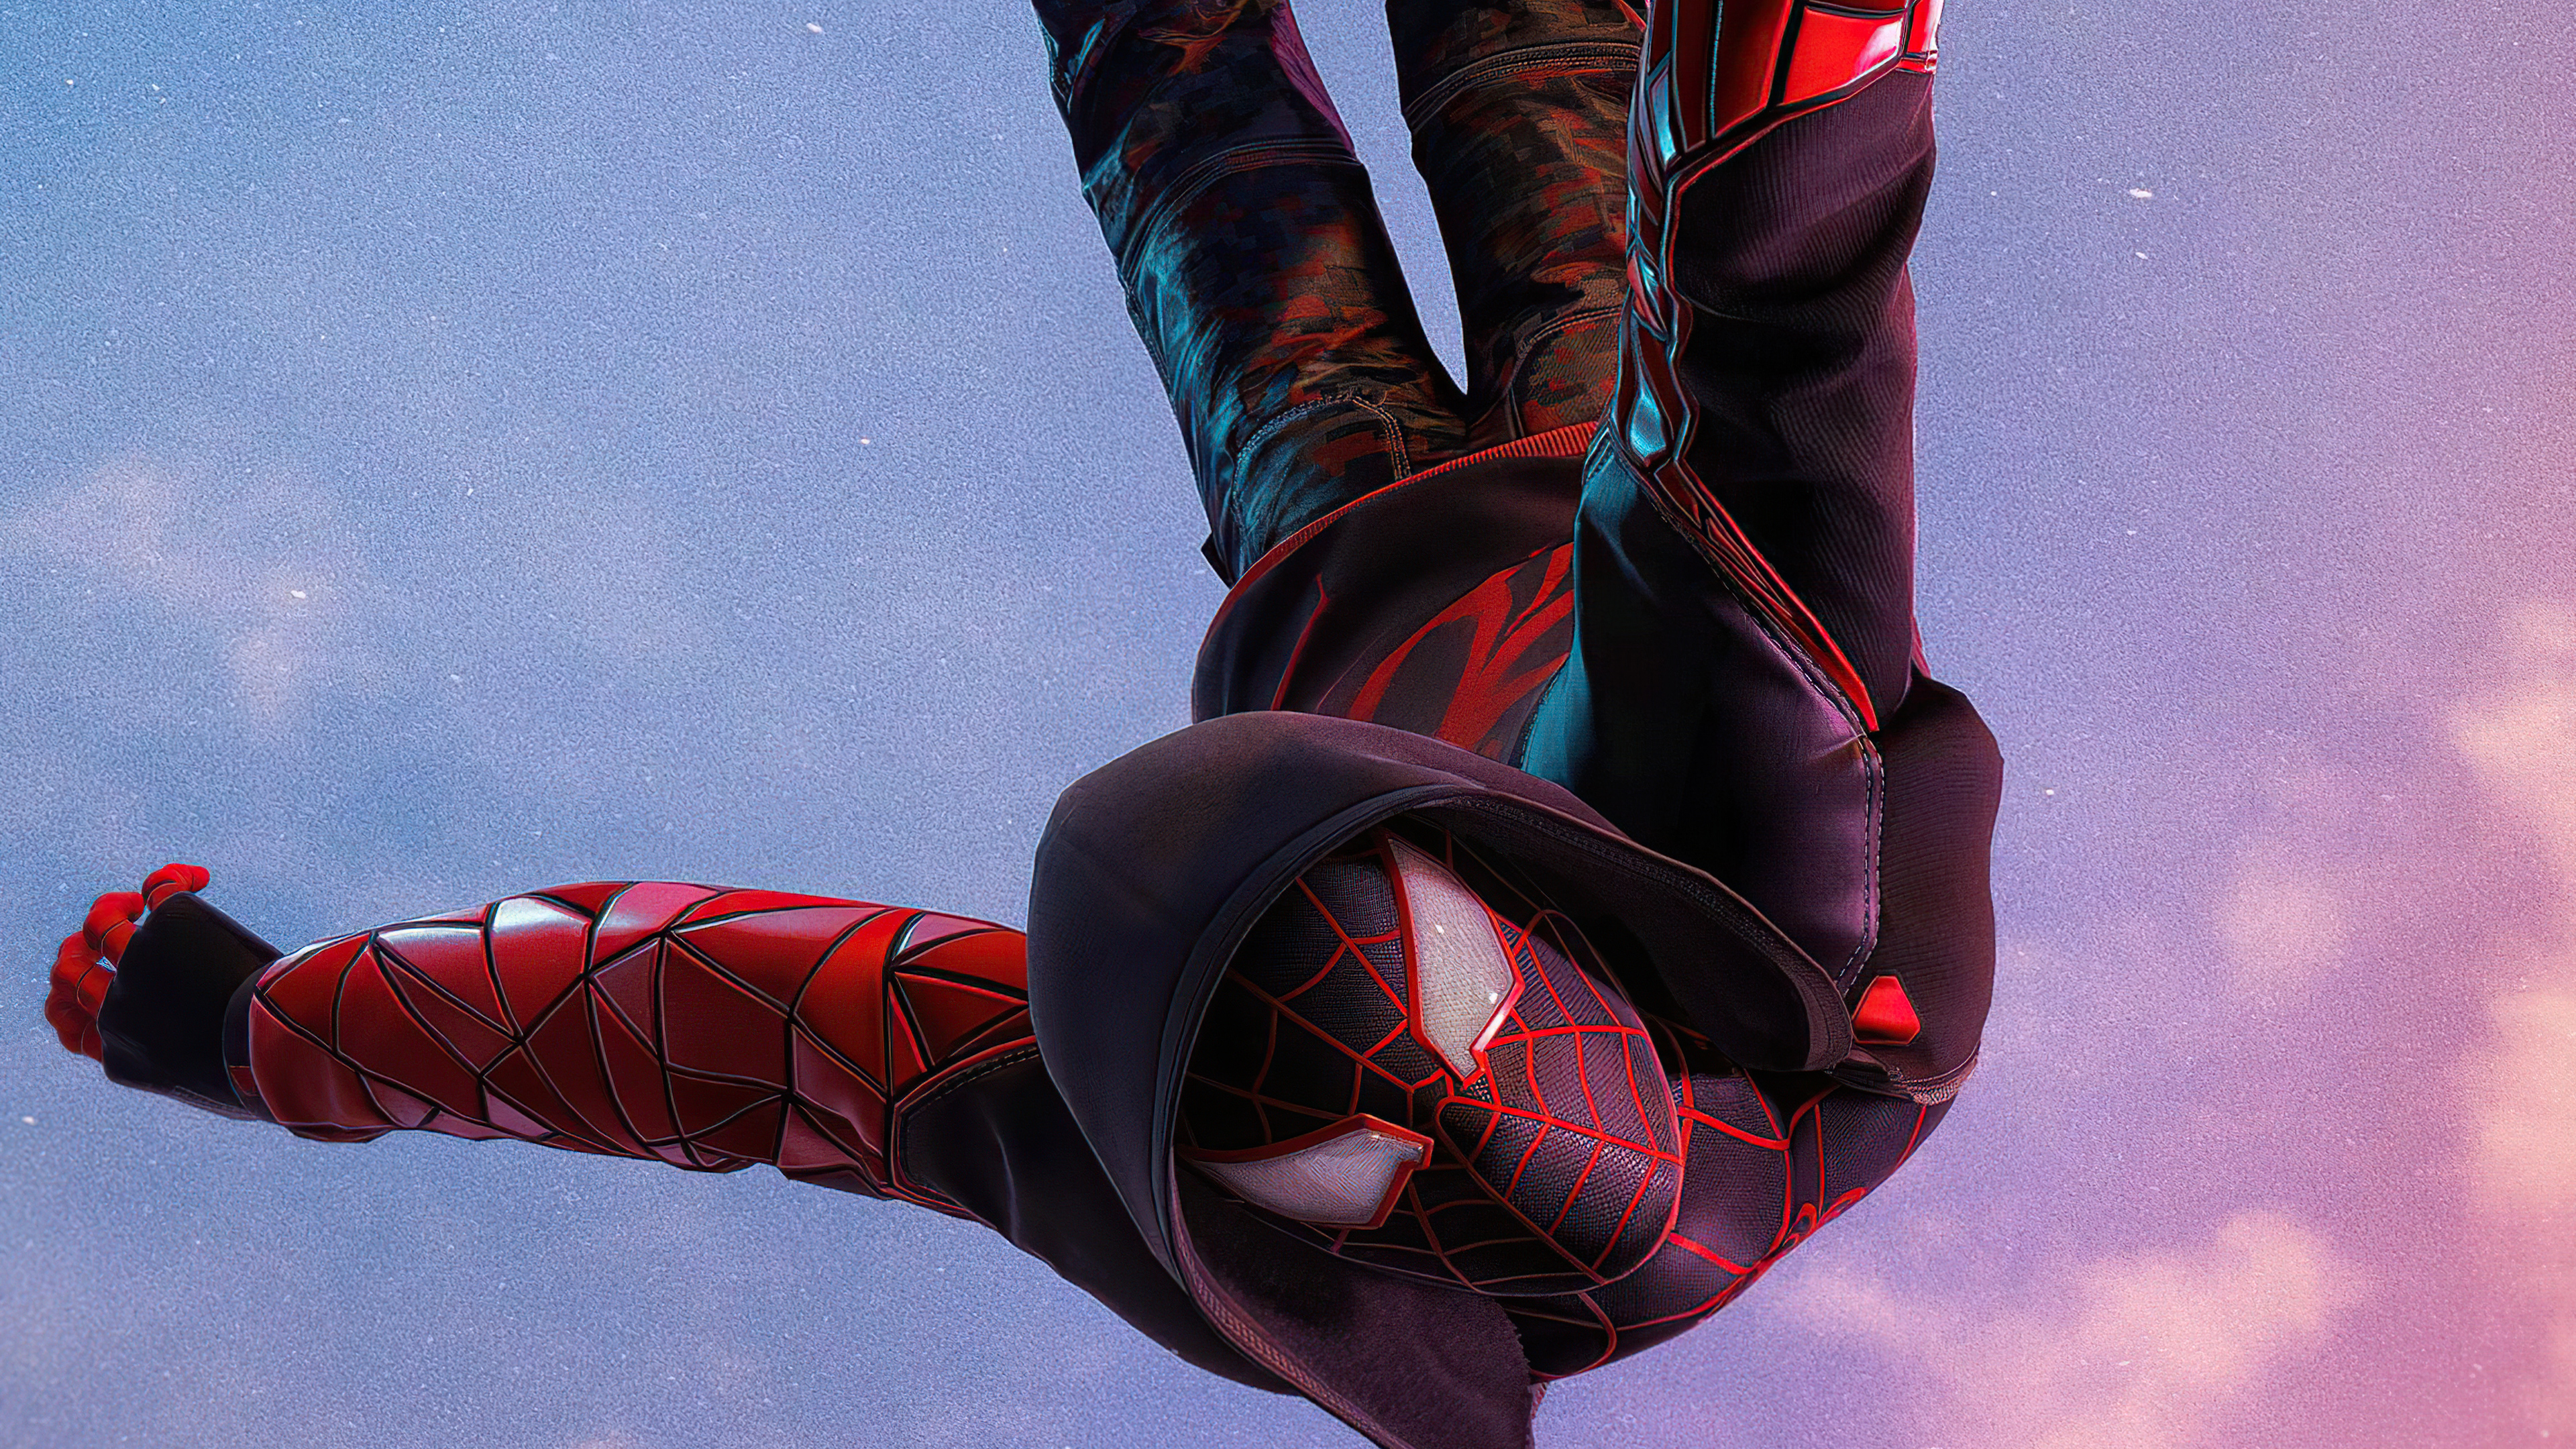 Mobile wallpaper: Spider Man, Video Game, Miles Morales, Marvel's Spider Man:  Miles Morales, 1005240 download the picture for free.